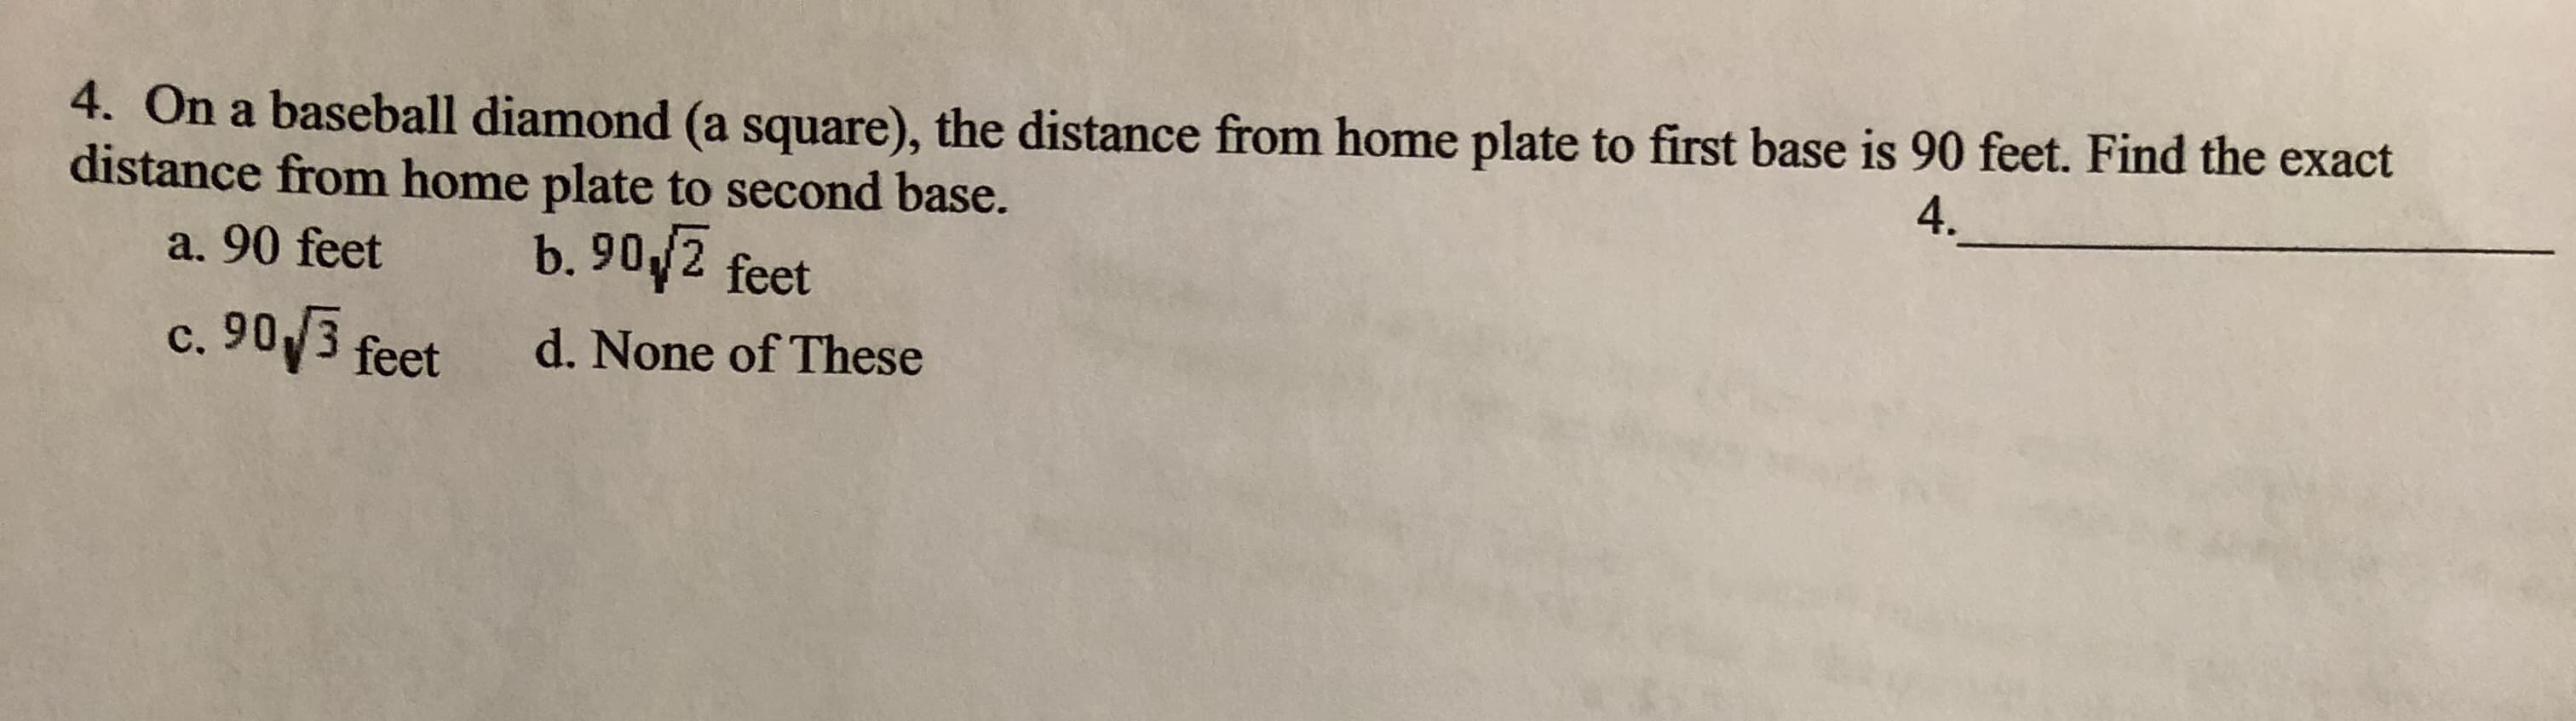 4. On a baseball diamond (a square), the distance from home plate to first base is 90 feet. Find the ex
distance from home plate to second base.
4.
b. 90/2 feet
a. 90 feet
c. 90 3 feet
d. None of These
